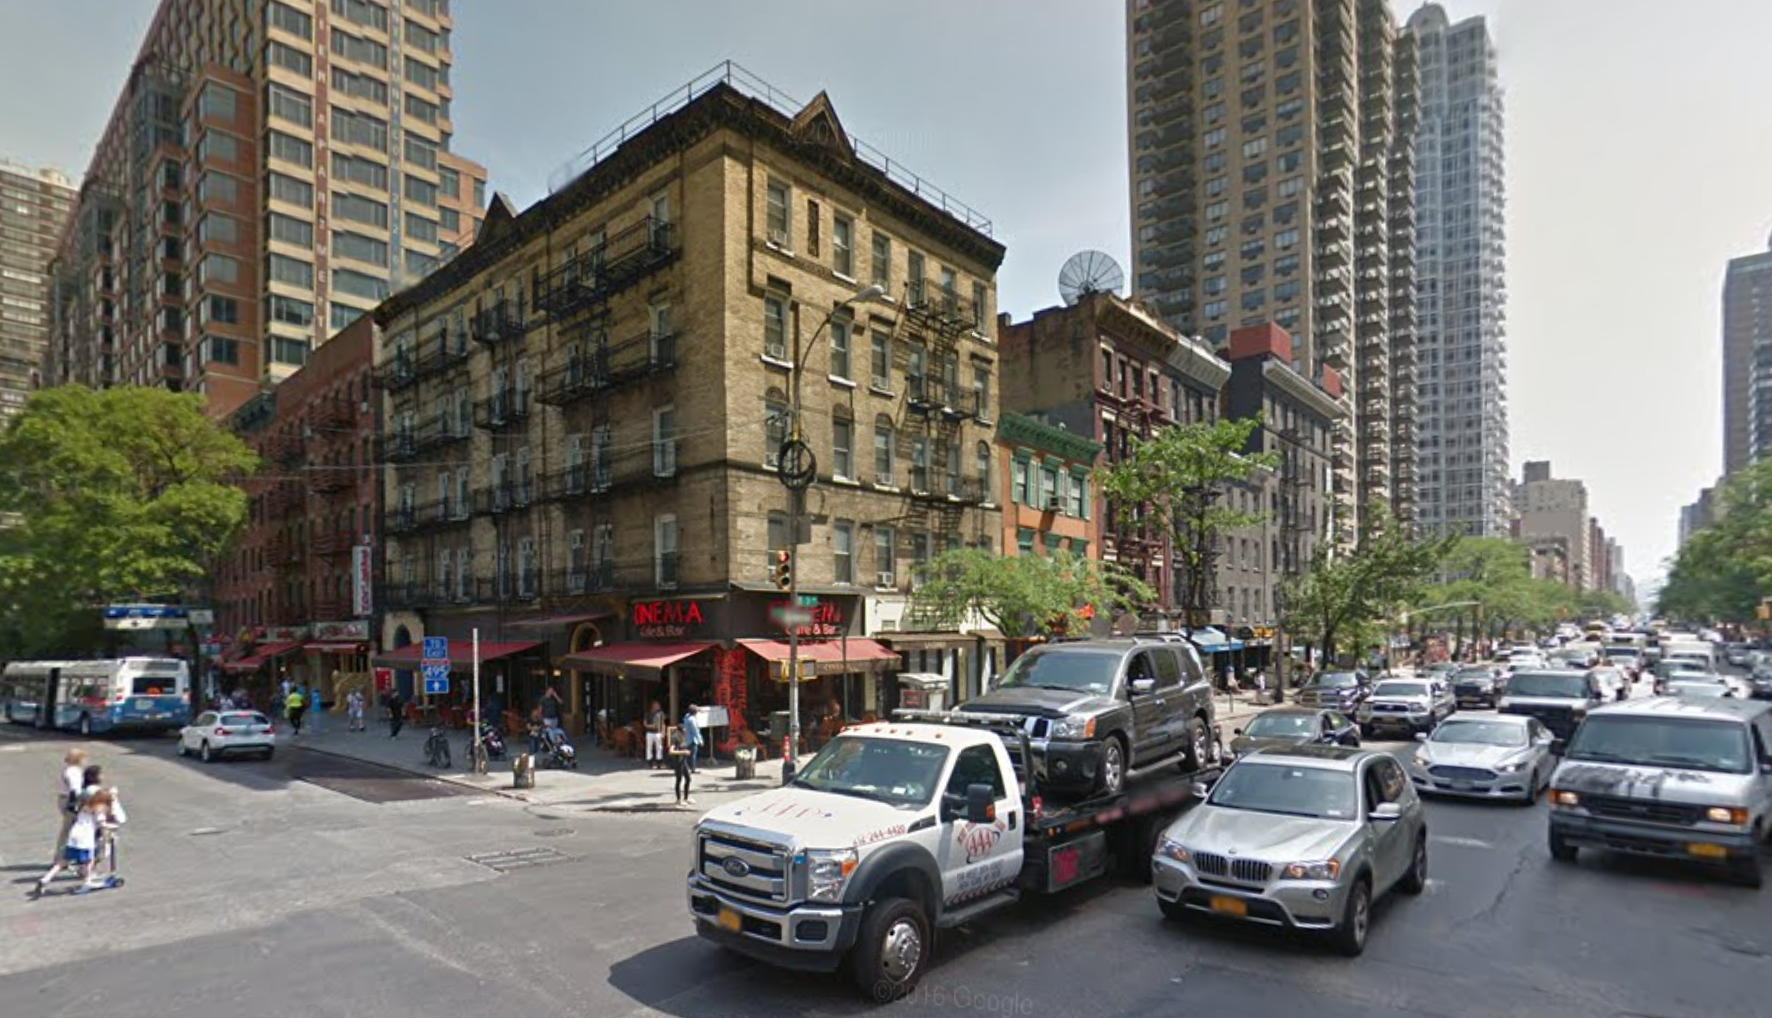 499 and 501 Third Avenue in June 2016. image via Google Maps